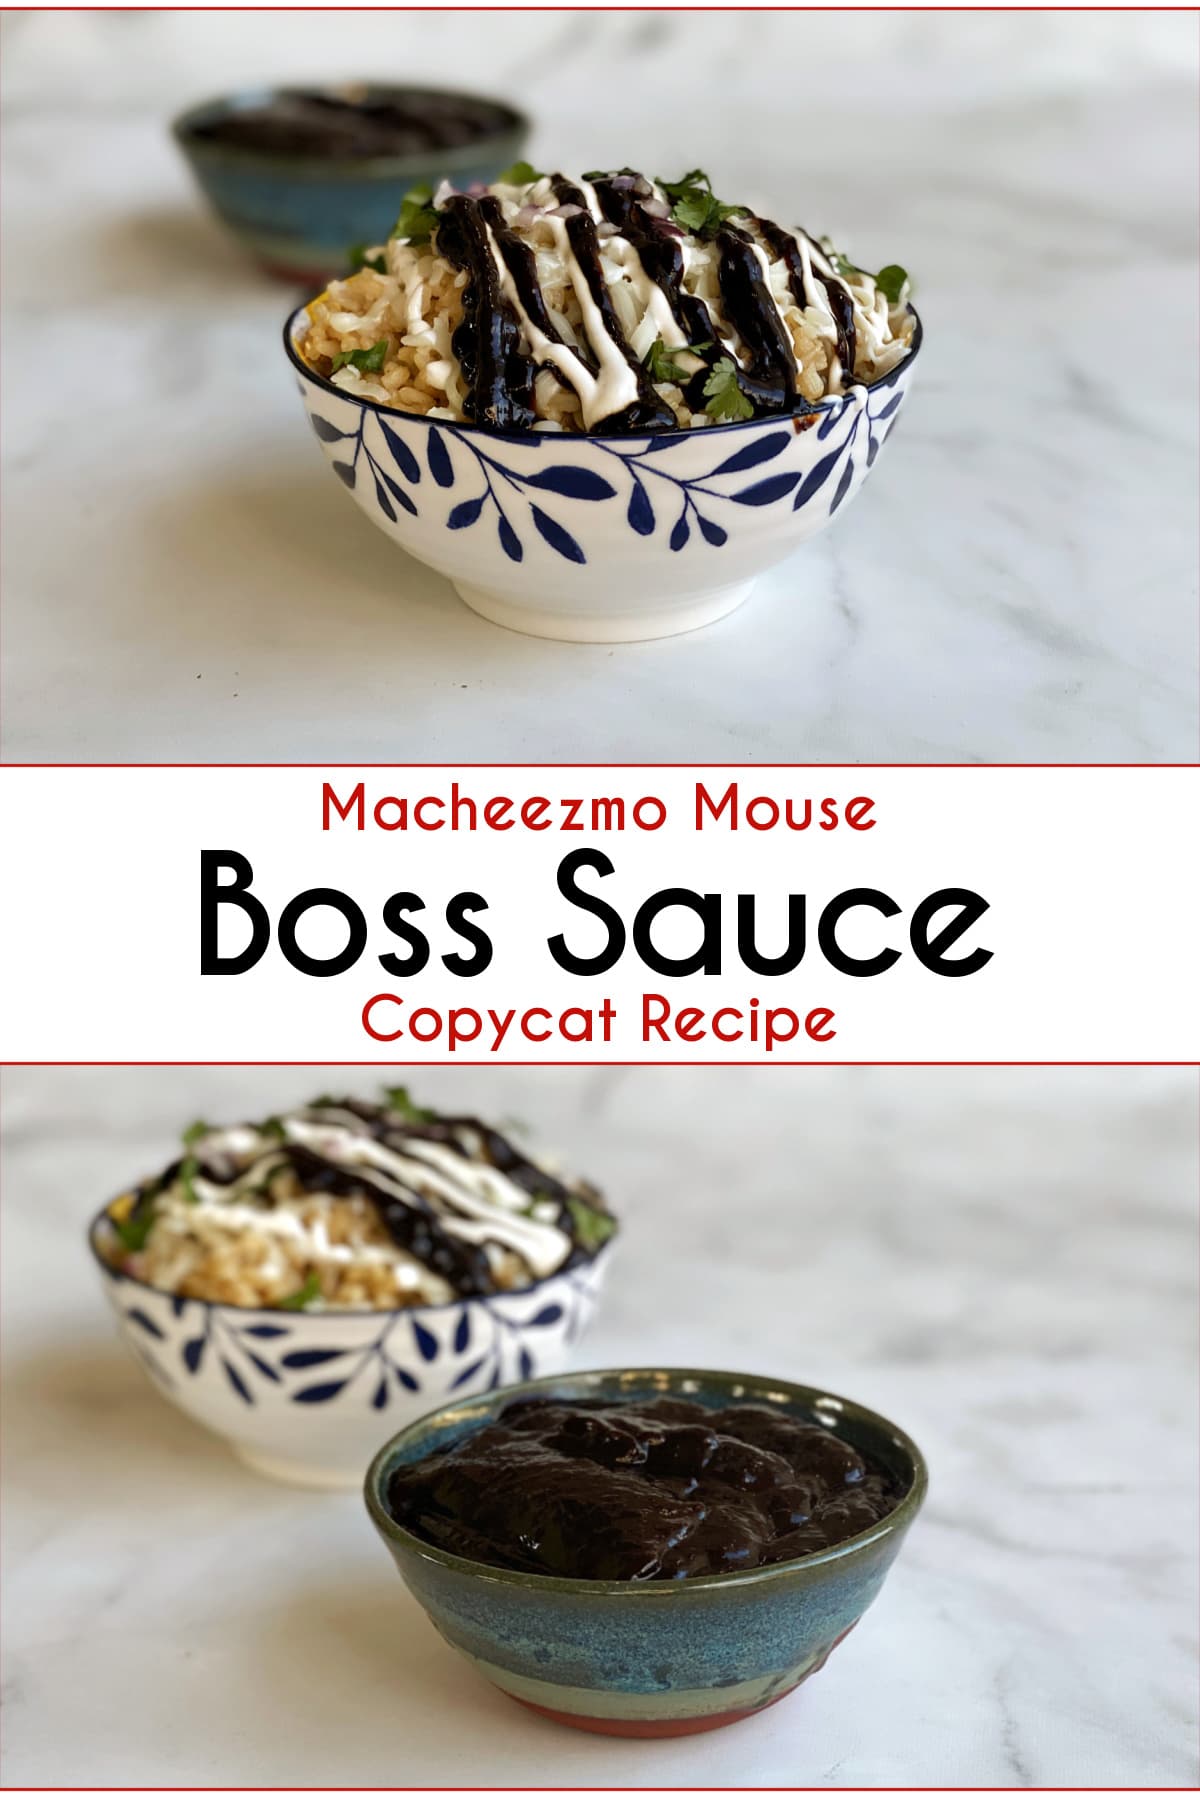 2-panel collage showing Boss Sauce over rice, with pin text: Macheezmo Mouse Boss Sauce Copycat Recipe.